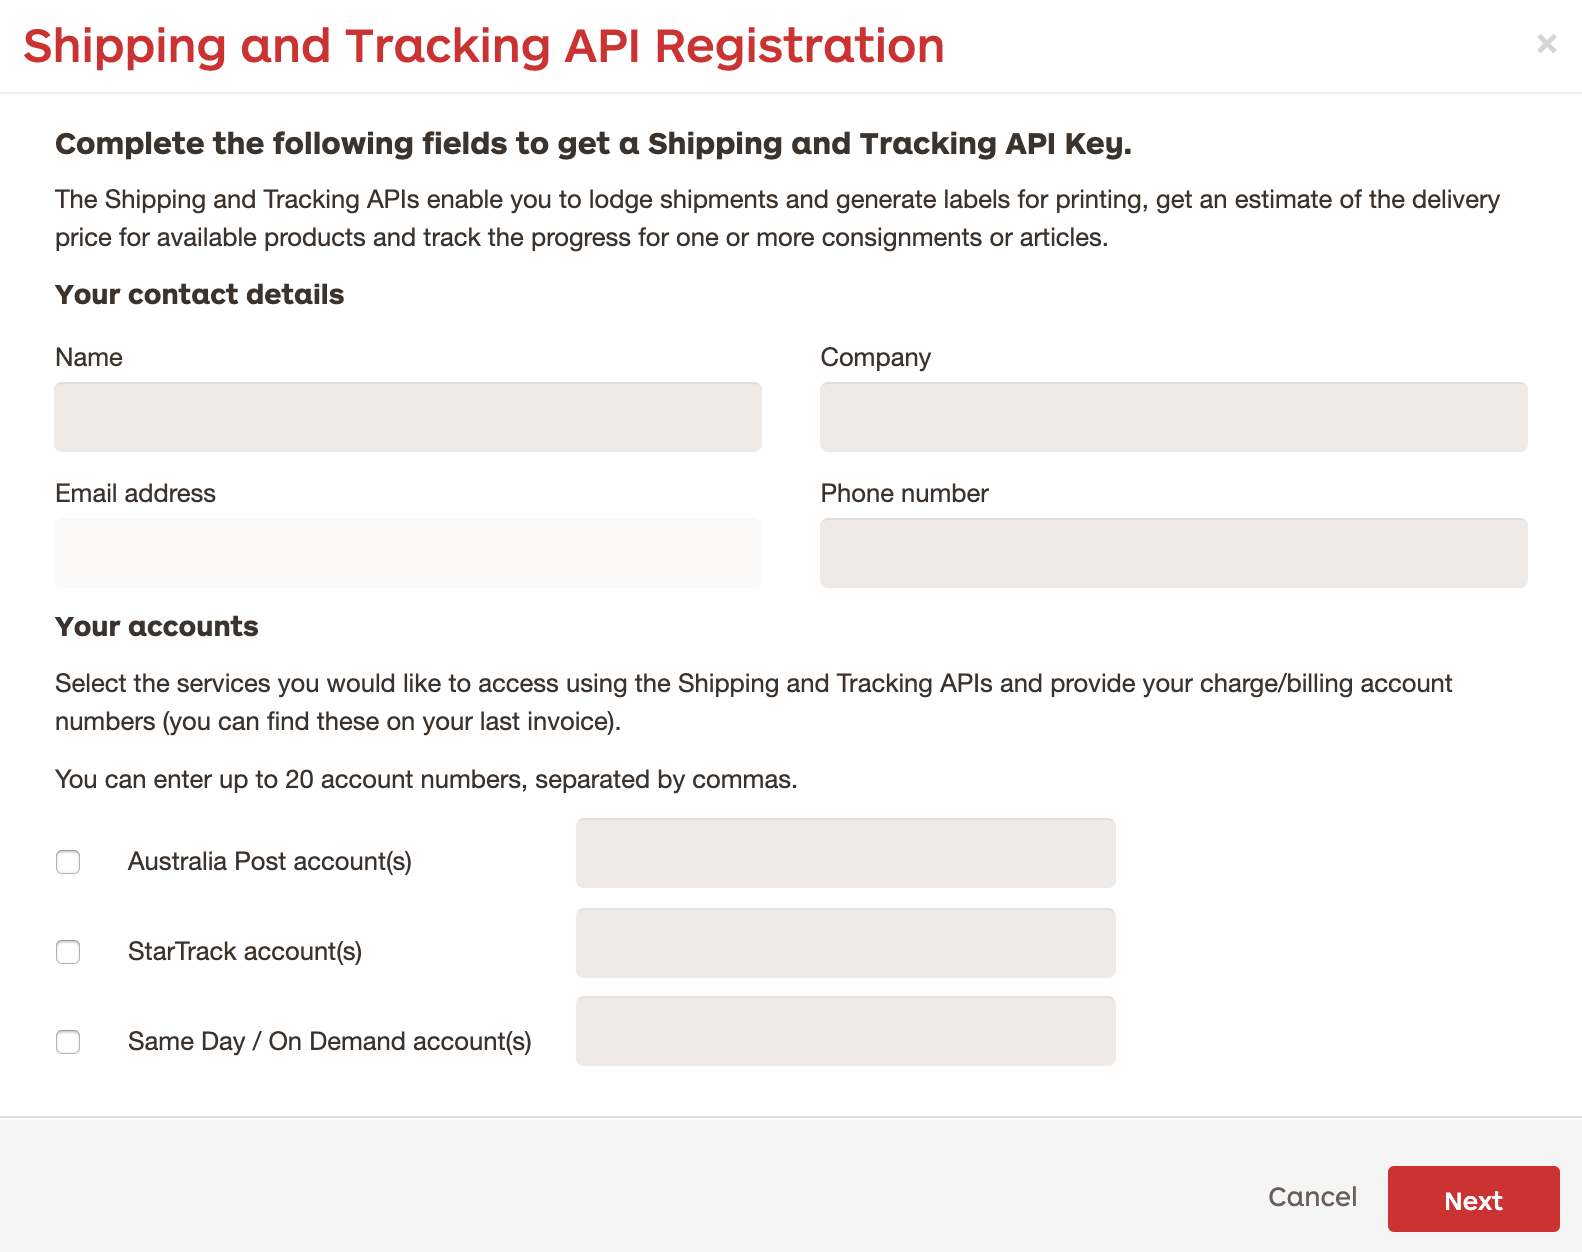 shipping-tracking-register-form-1593136270.png